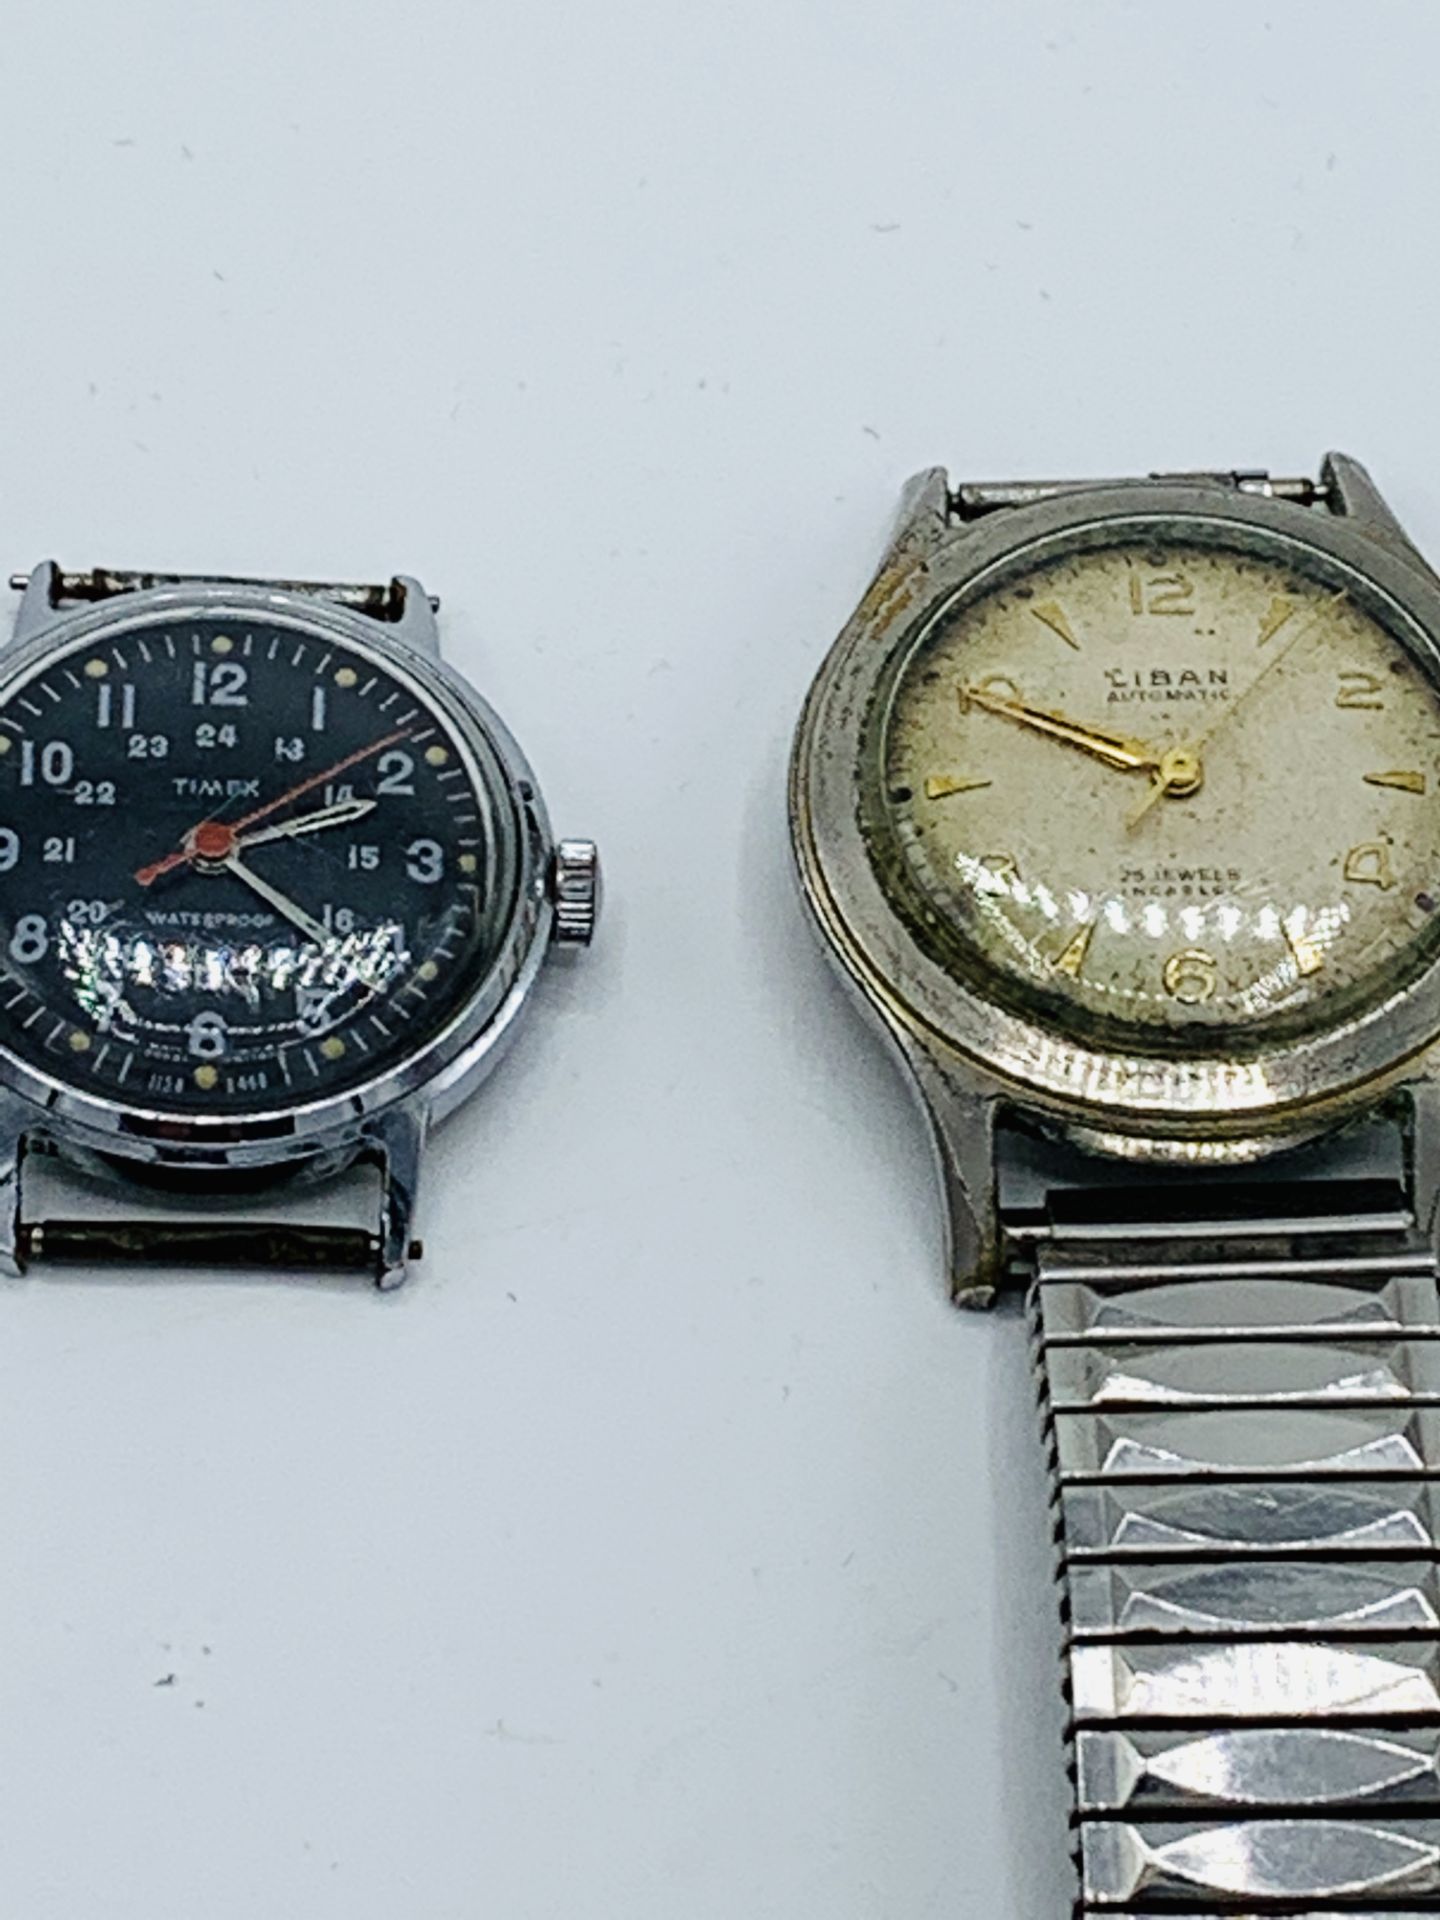 Marina De Luxe manual gent's wrist watch, no strap, going; Liban automatic wrist watch, and 2 others - Image 2 of 6